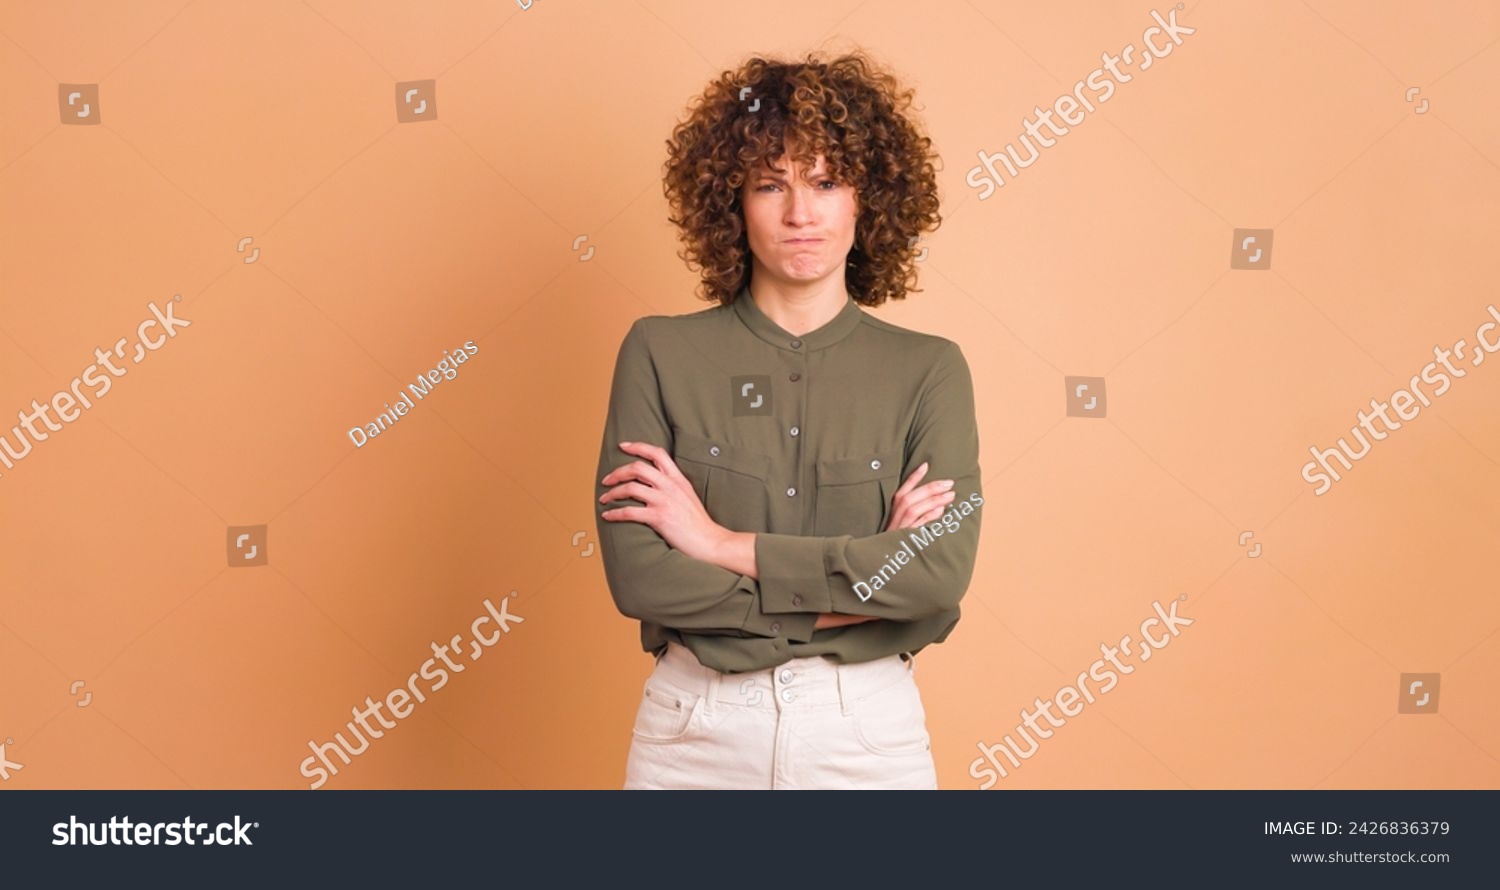 Disagreeing young woman with twisted mouth on beige background #2426836379